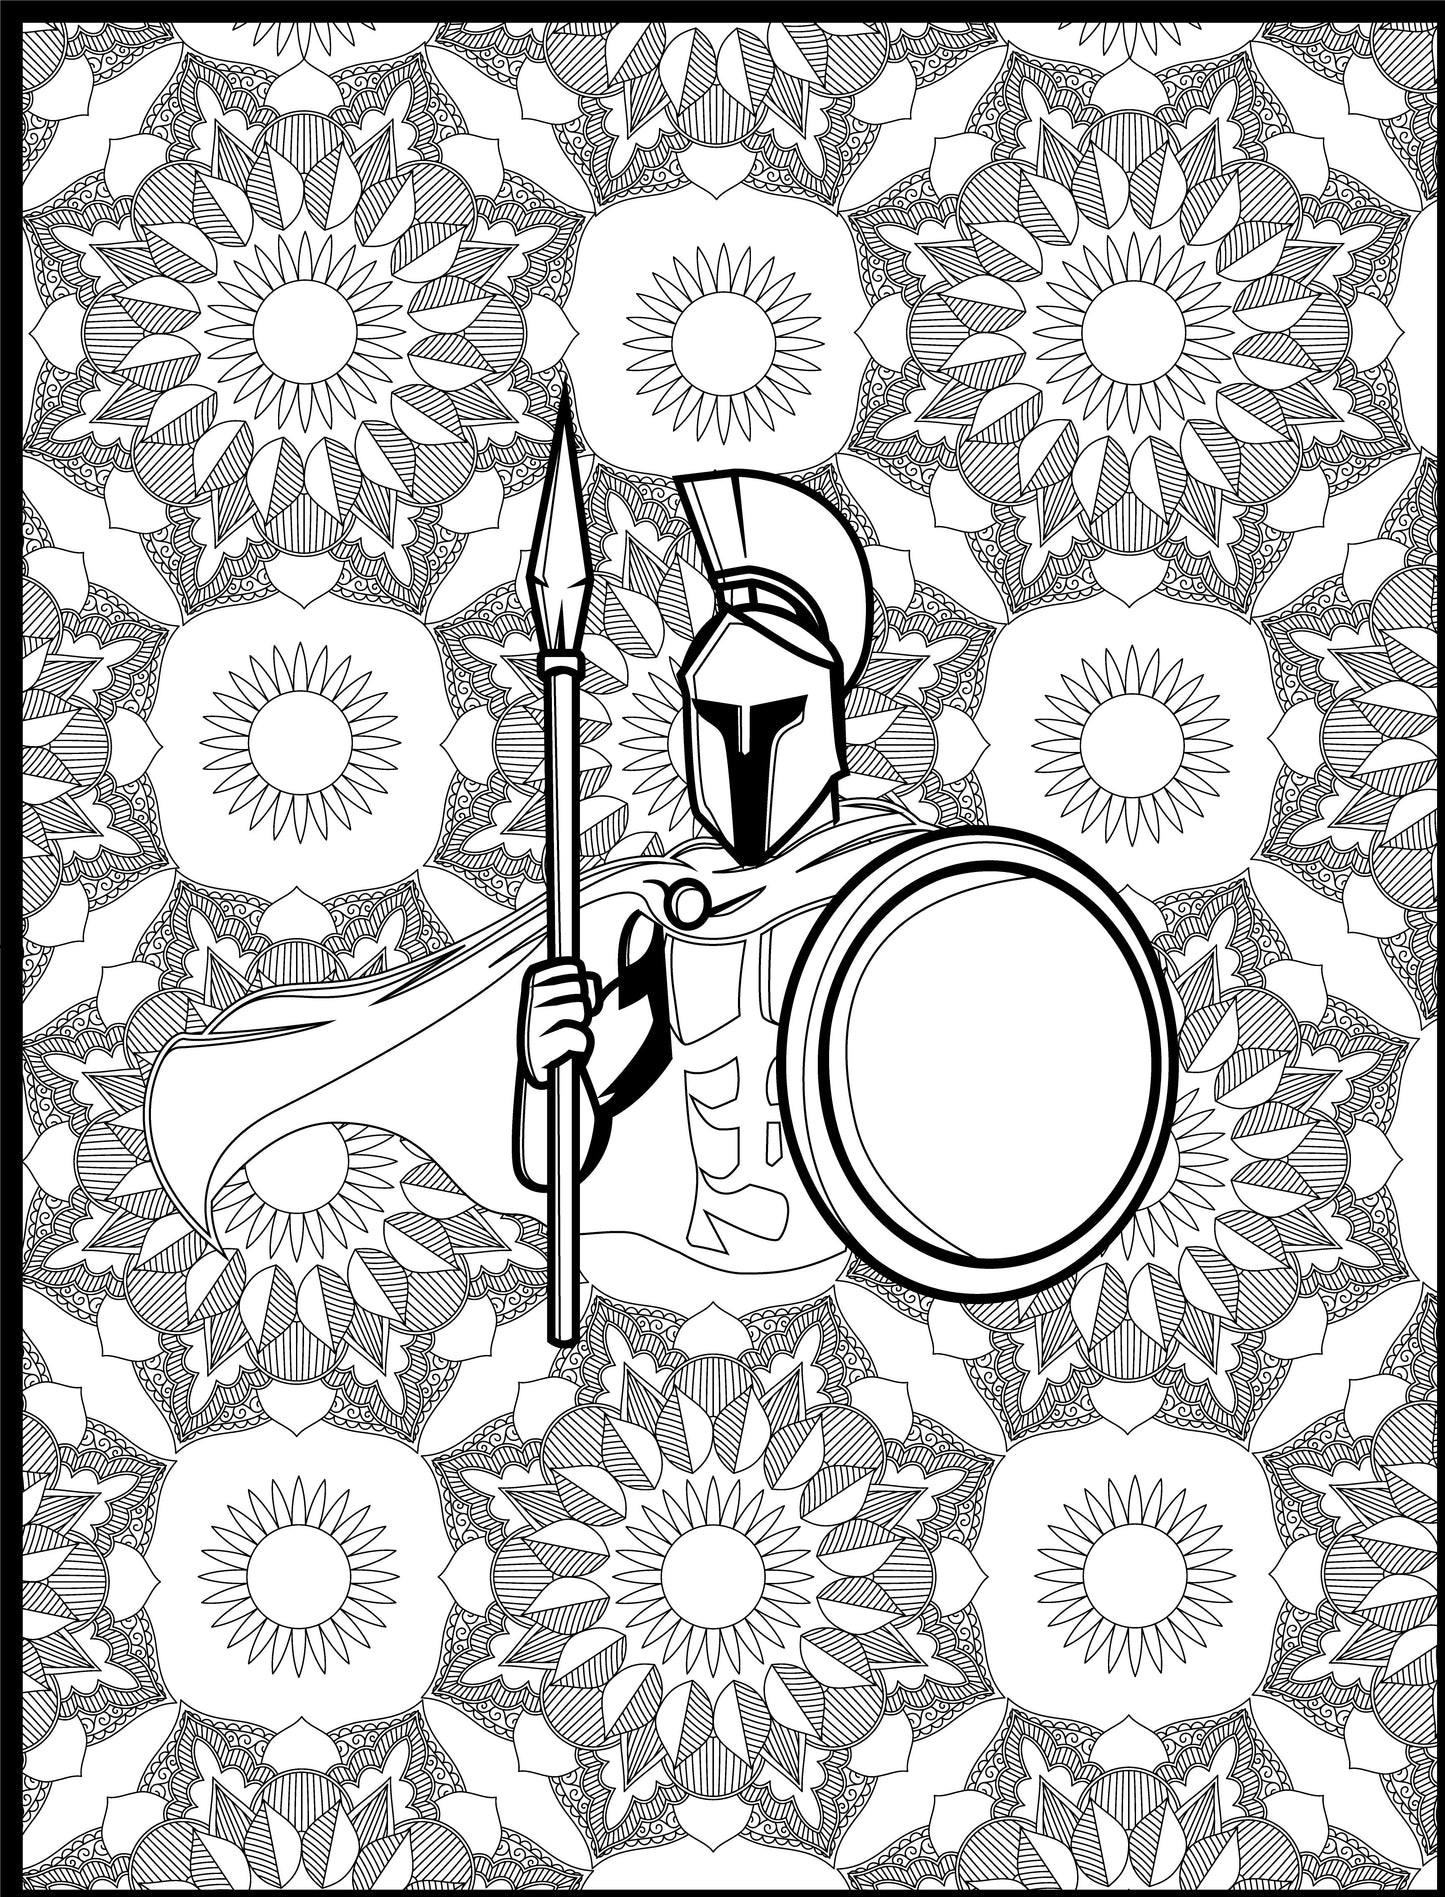 Spartan Personalized Giant Coloring Poster 46"x60"